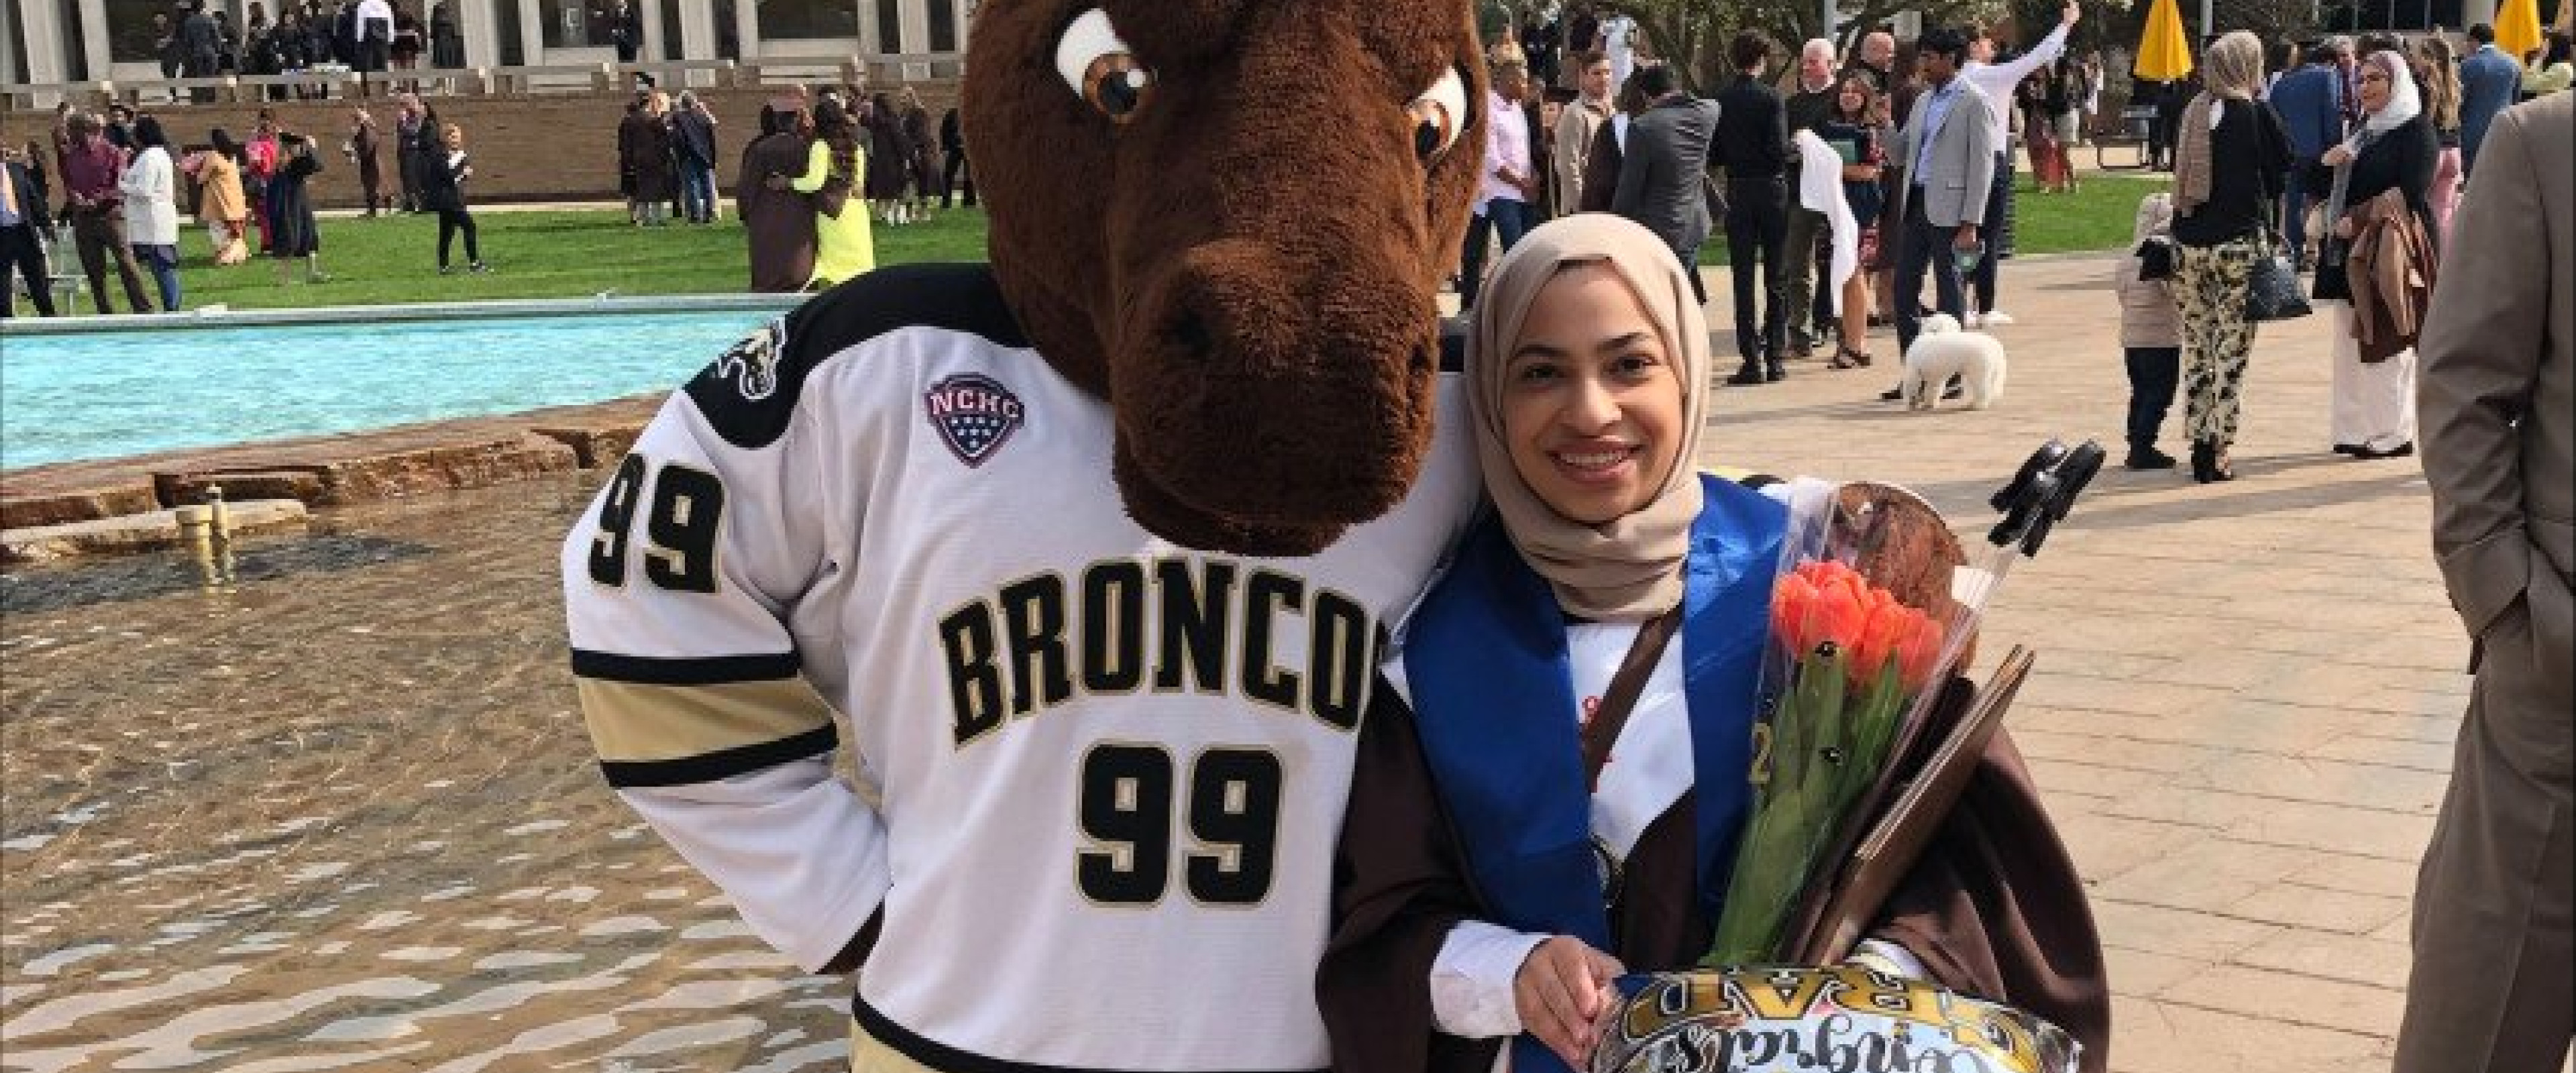 Student stands with Buster Bronco near WMU fountains